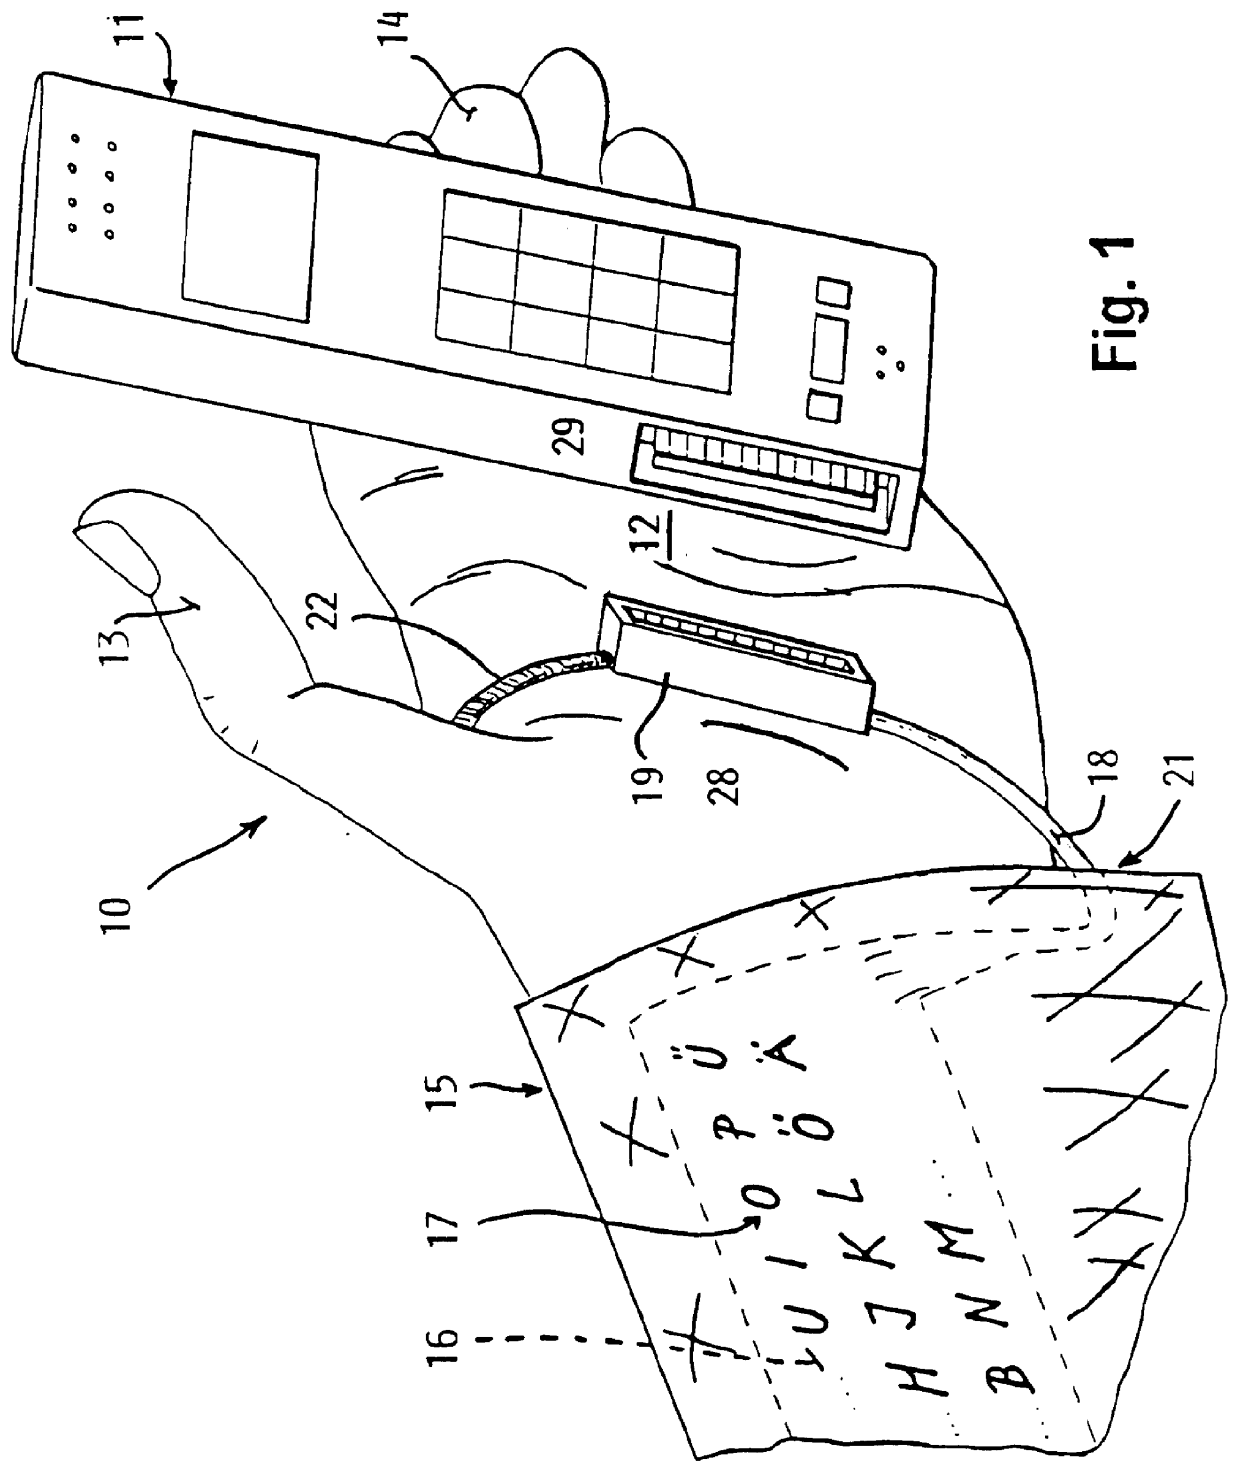 Device for electrically connecting a mobile phone to a keyboard